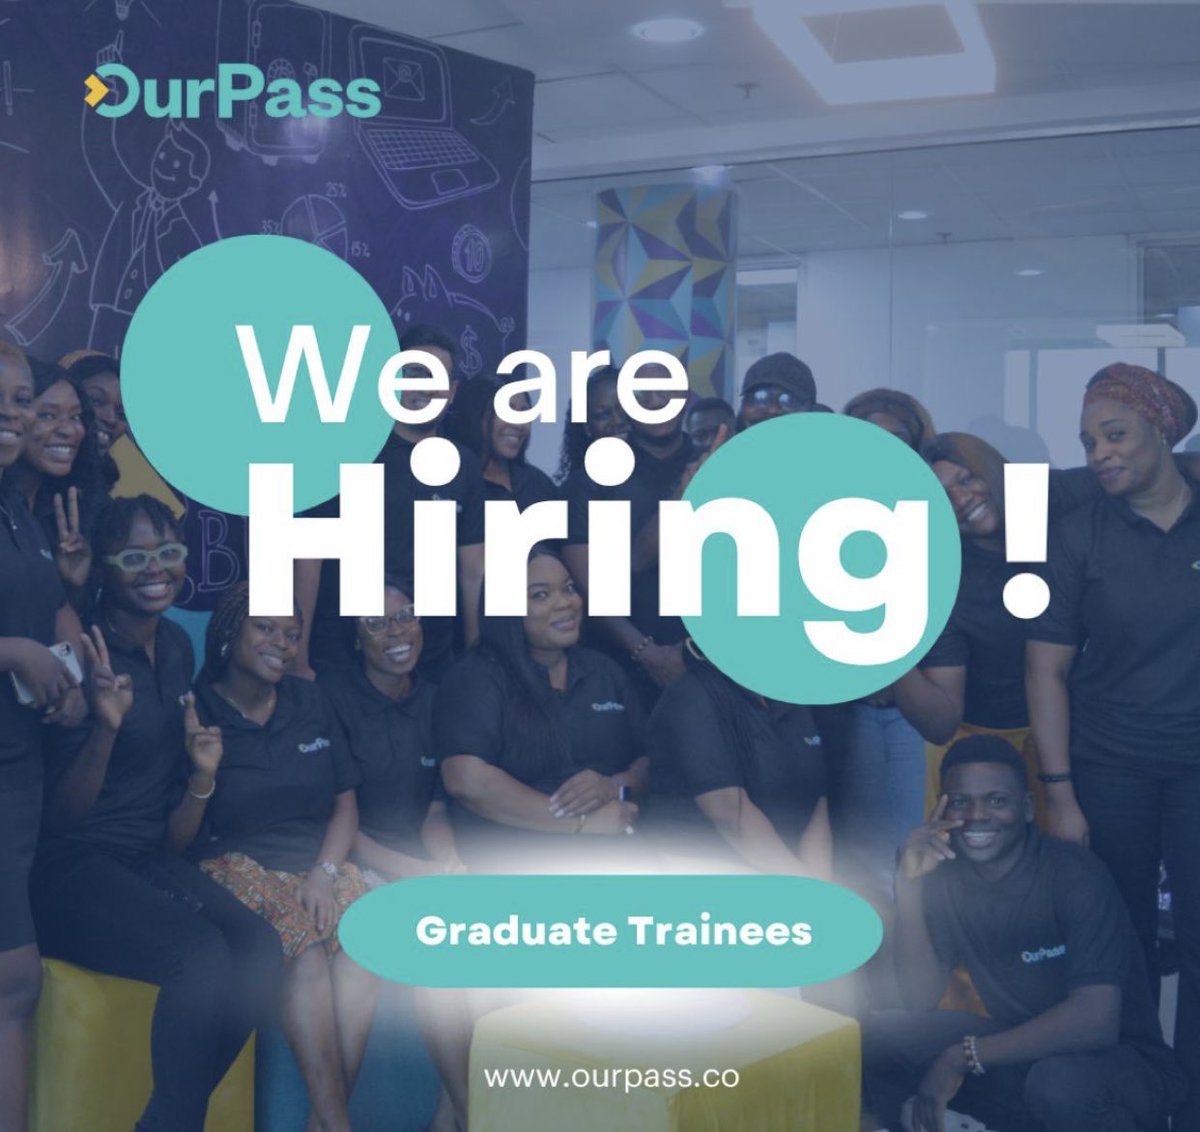 OurPass Graduate Trainee Program! 🎓 Are you ready to ignite your career journey? Join us as a Graduate Trainee at OurPass Business Banking. If you're fueled by a passion for transforming customers' lives, this opportunity is tailor-made for you. Embrace the opportunity to…